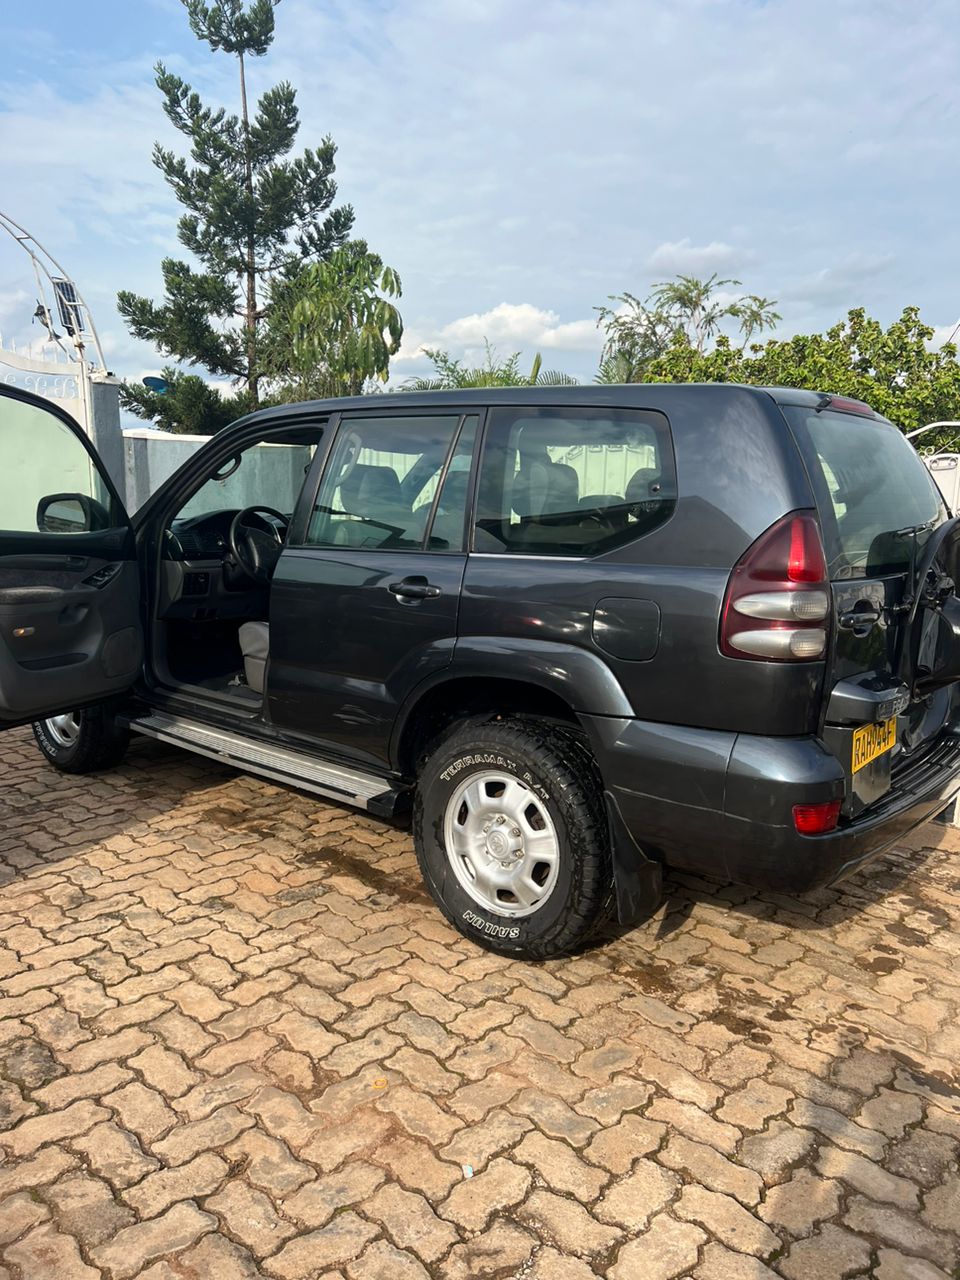 TOYOTA PRADO Toyota Prado: A rugged, versatile SUV engineered for off-road adventures and city life alike. With spacious interiors and advanced safety features, it offers a blend of comfort and capability. - Rent Car Rwanda